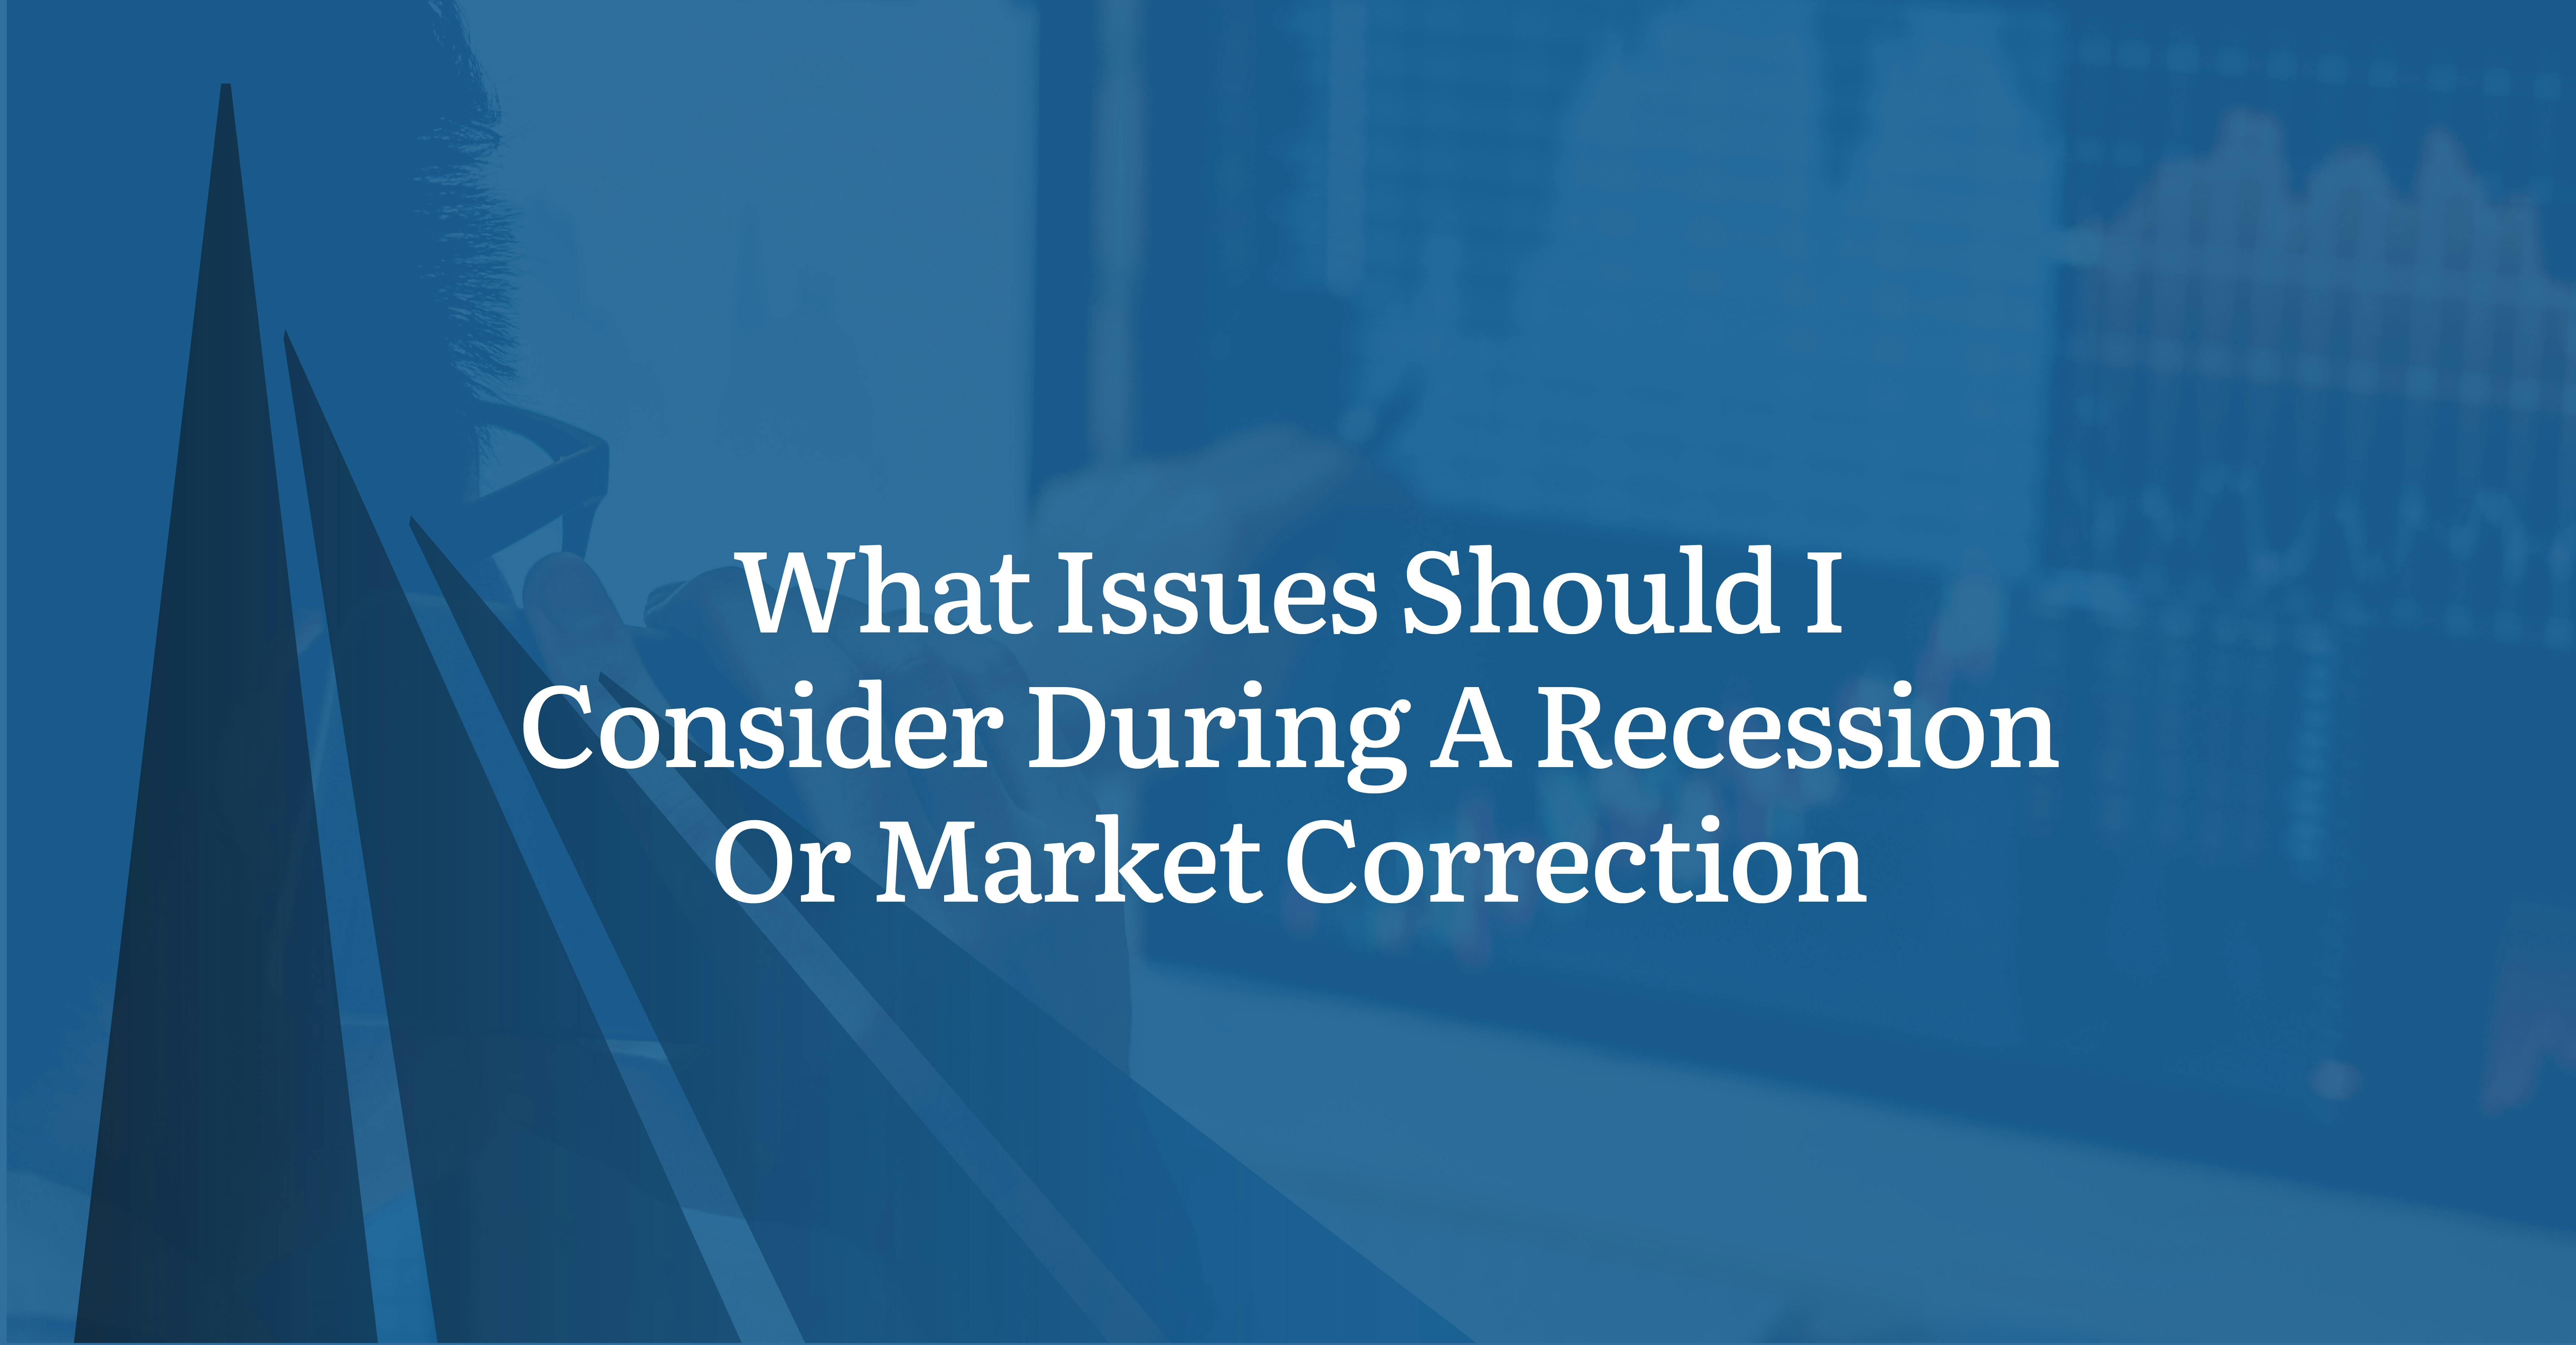 What Issues Should I Consider During A Recession Or Market Correction